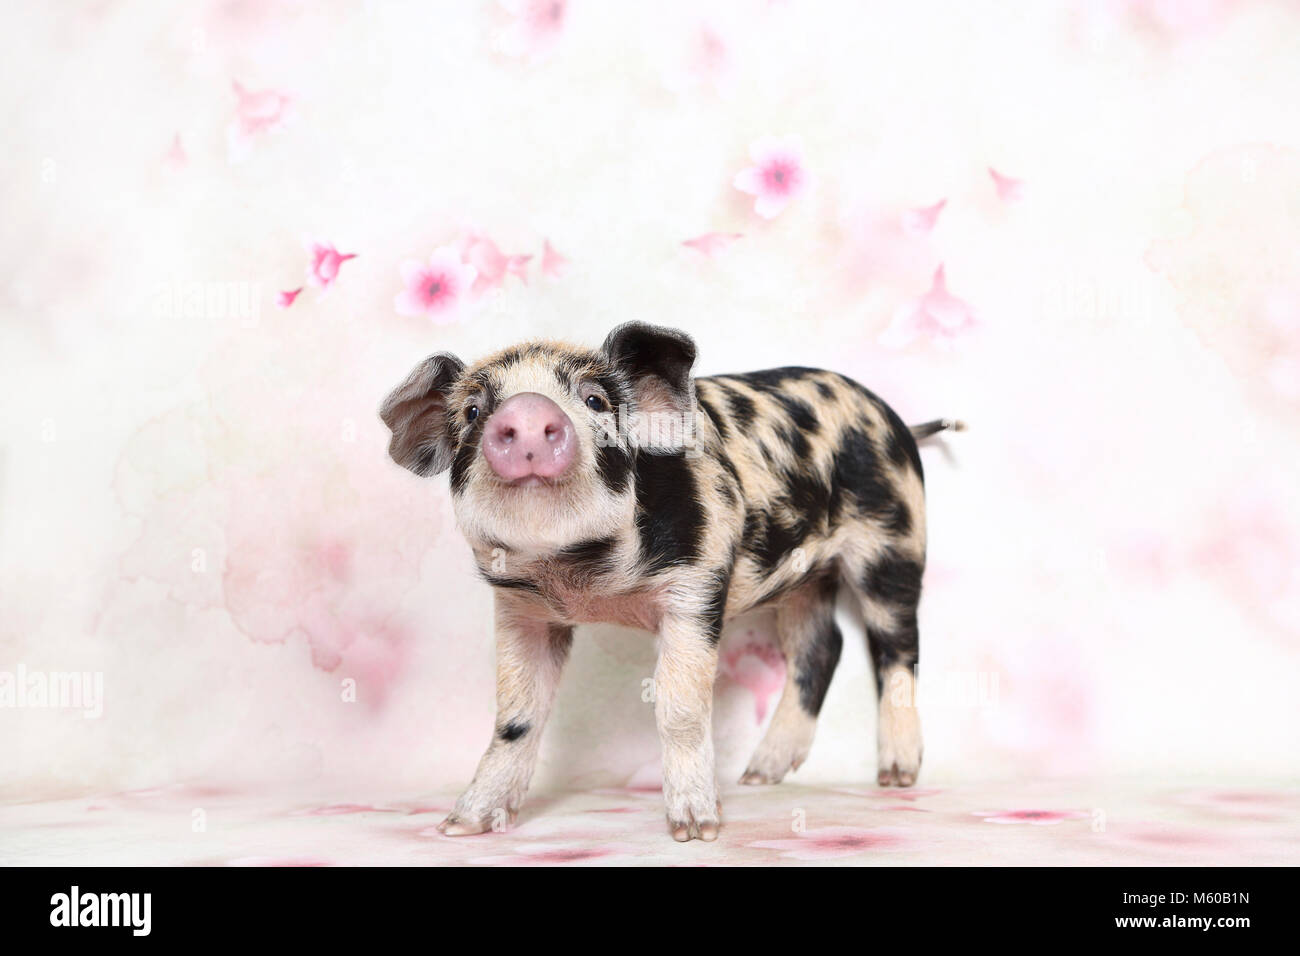 Domestic Pig, Turopolje x ?. Piglet (4 weeks old), standing. Studio picture seen against a white background with flower print. Germany Stock Photo